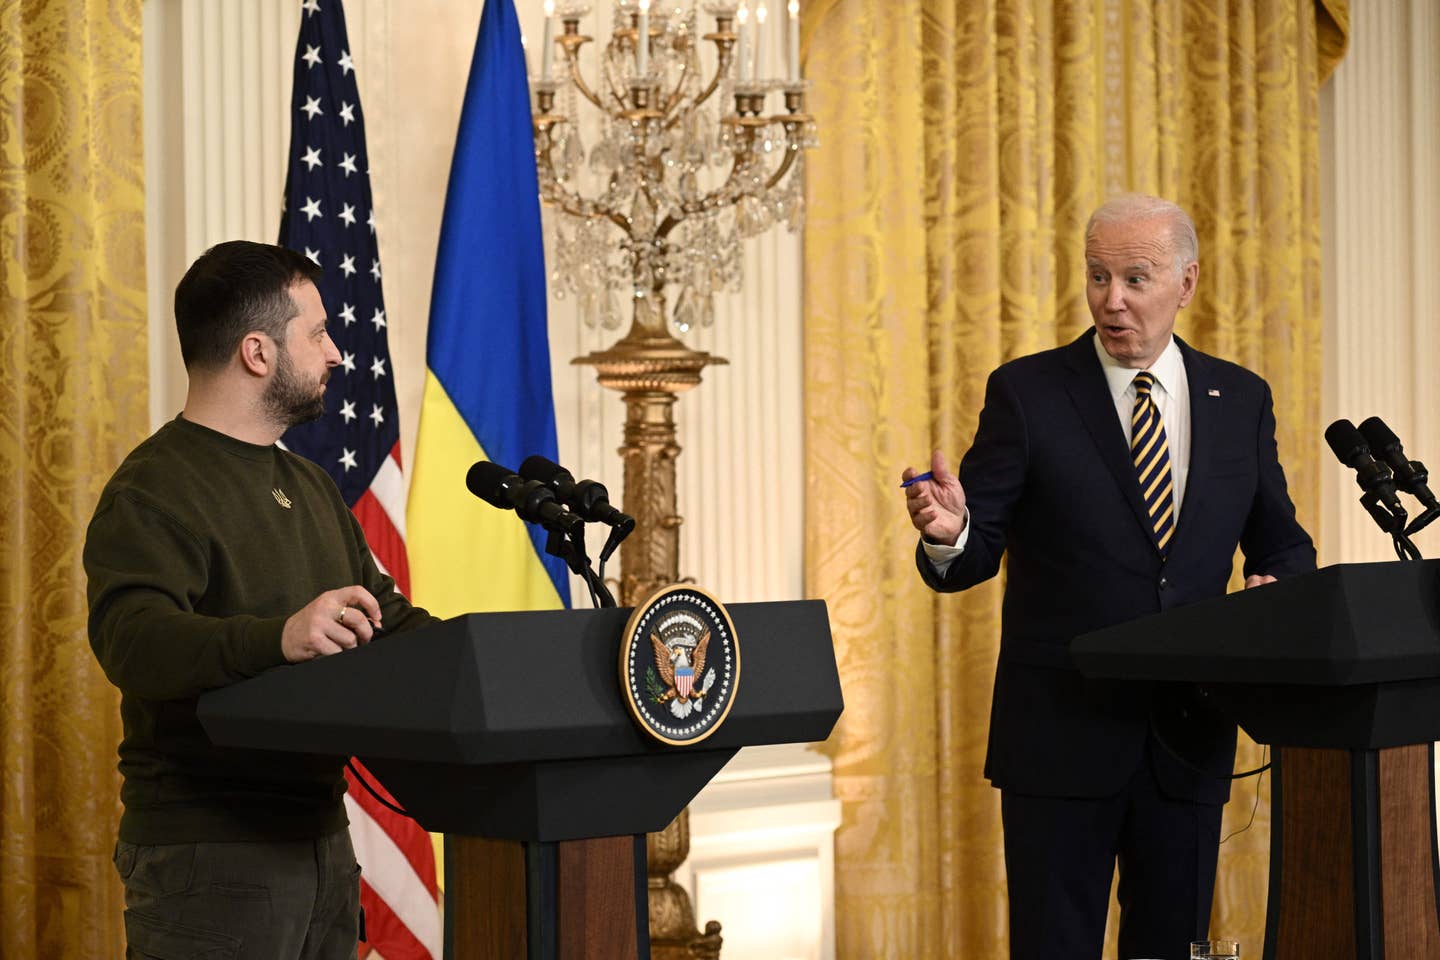 Presidents Biden and Zelensky have a light-hearted moment during their joint press conference.  (Photo by BRENDAN SMIALOWSKI/AFP via Getty Images)